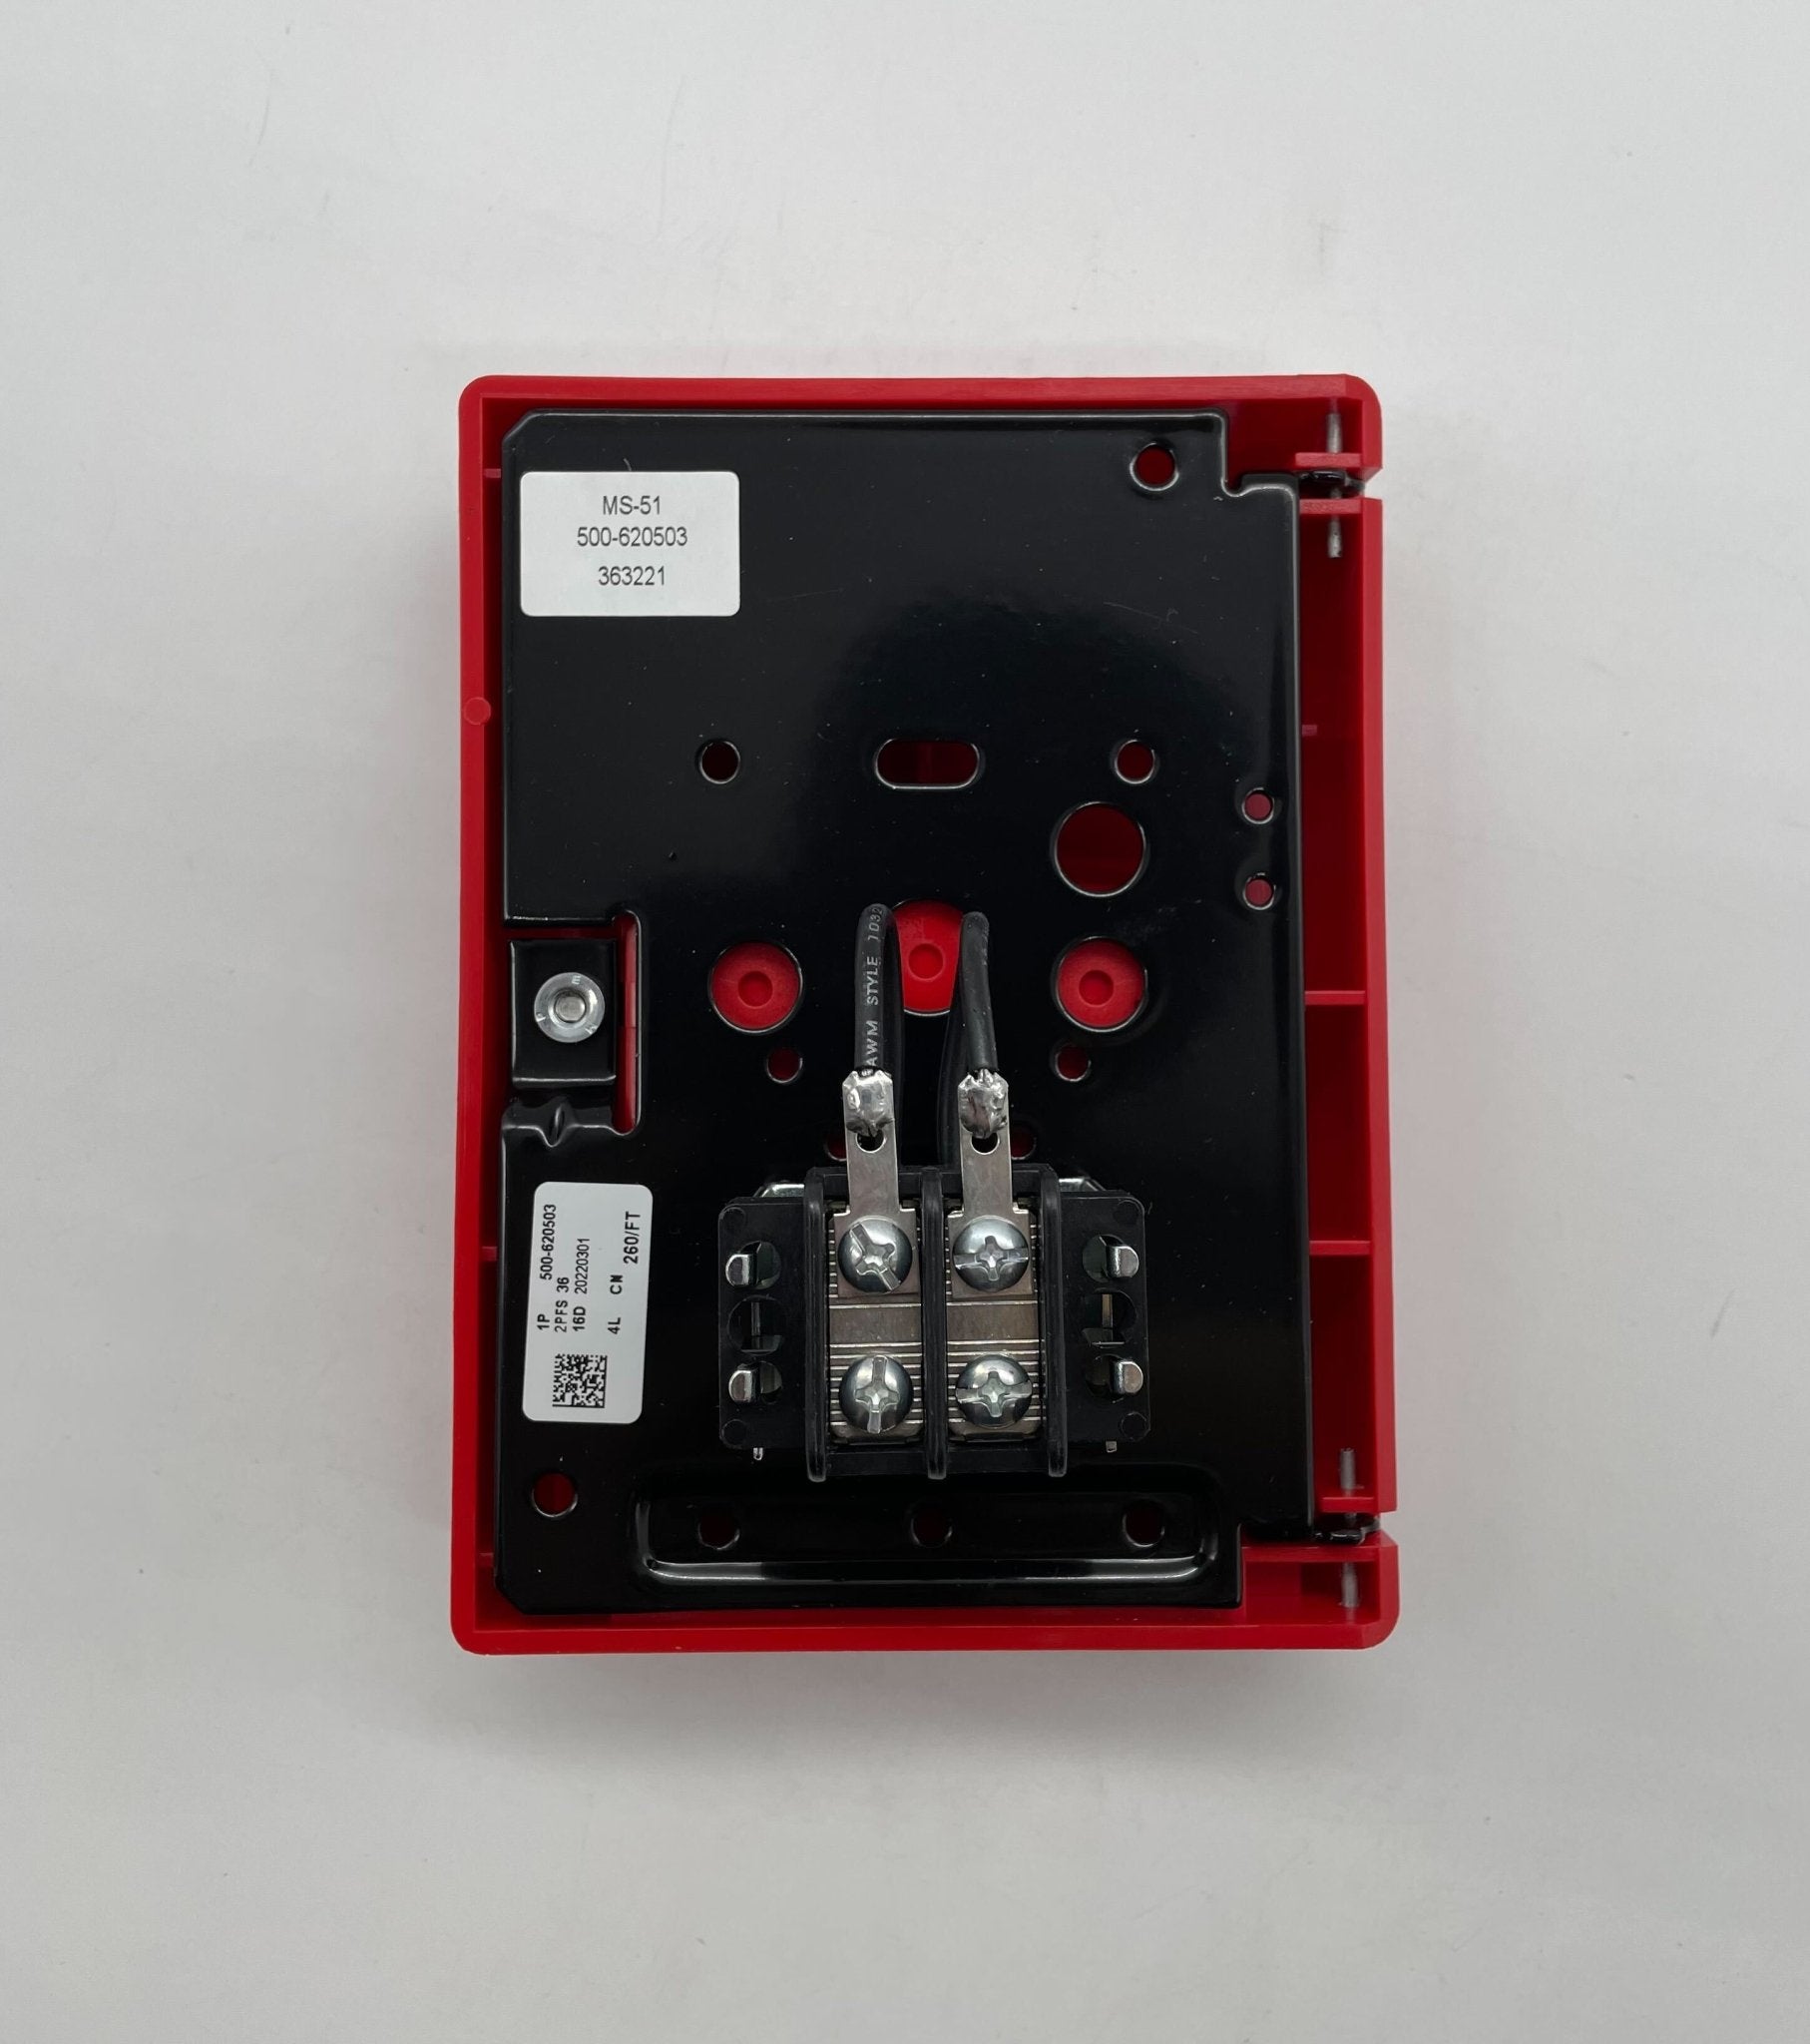 Siemens MS-51 Manual Pull Station Fire Alarm - The Fire Alarm Supplier